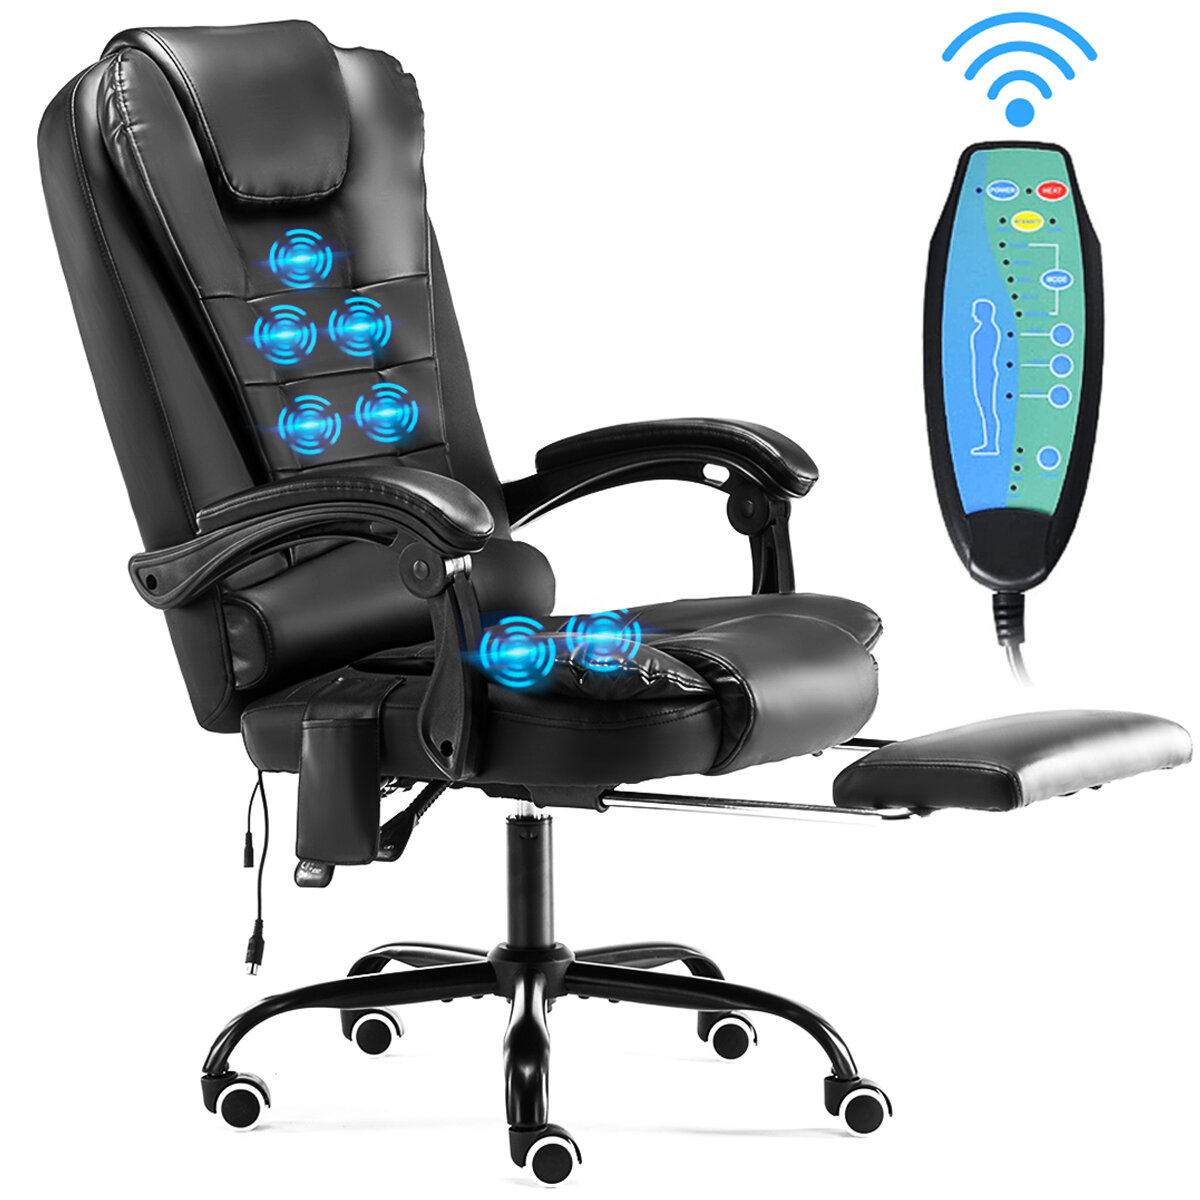 

HOFFREE Ergonomic Massage Office Chair Soft PU Leather Executive Office Chair High Back with Adjustable Lumbar Support a